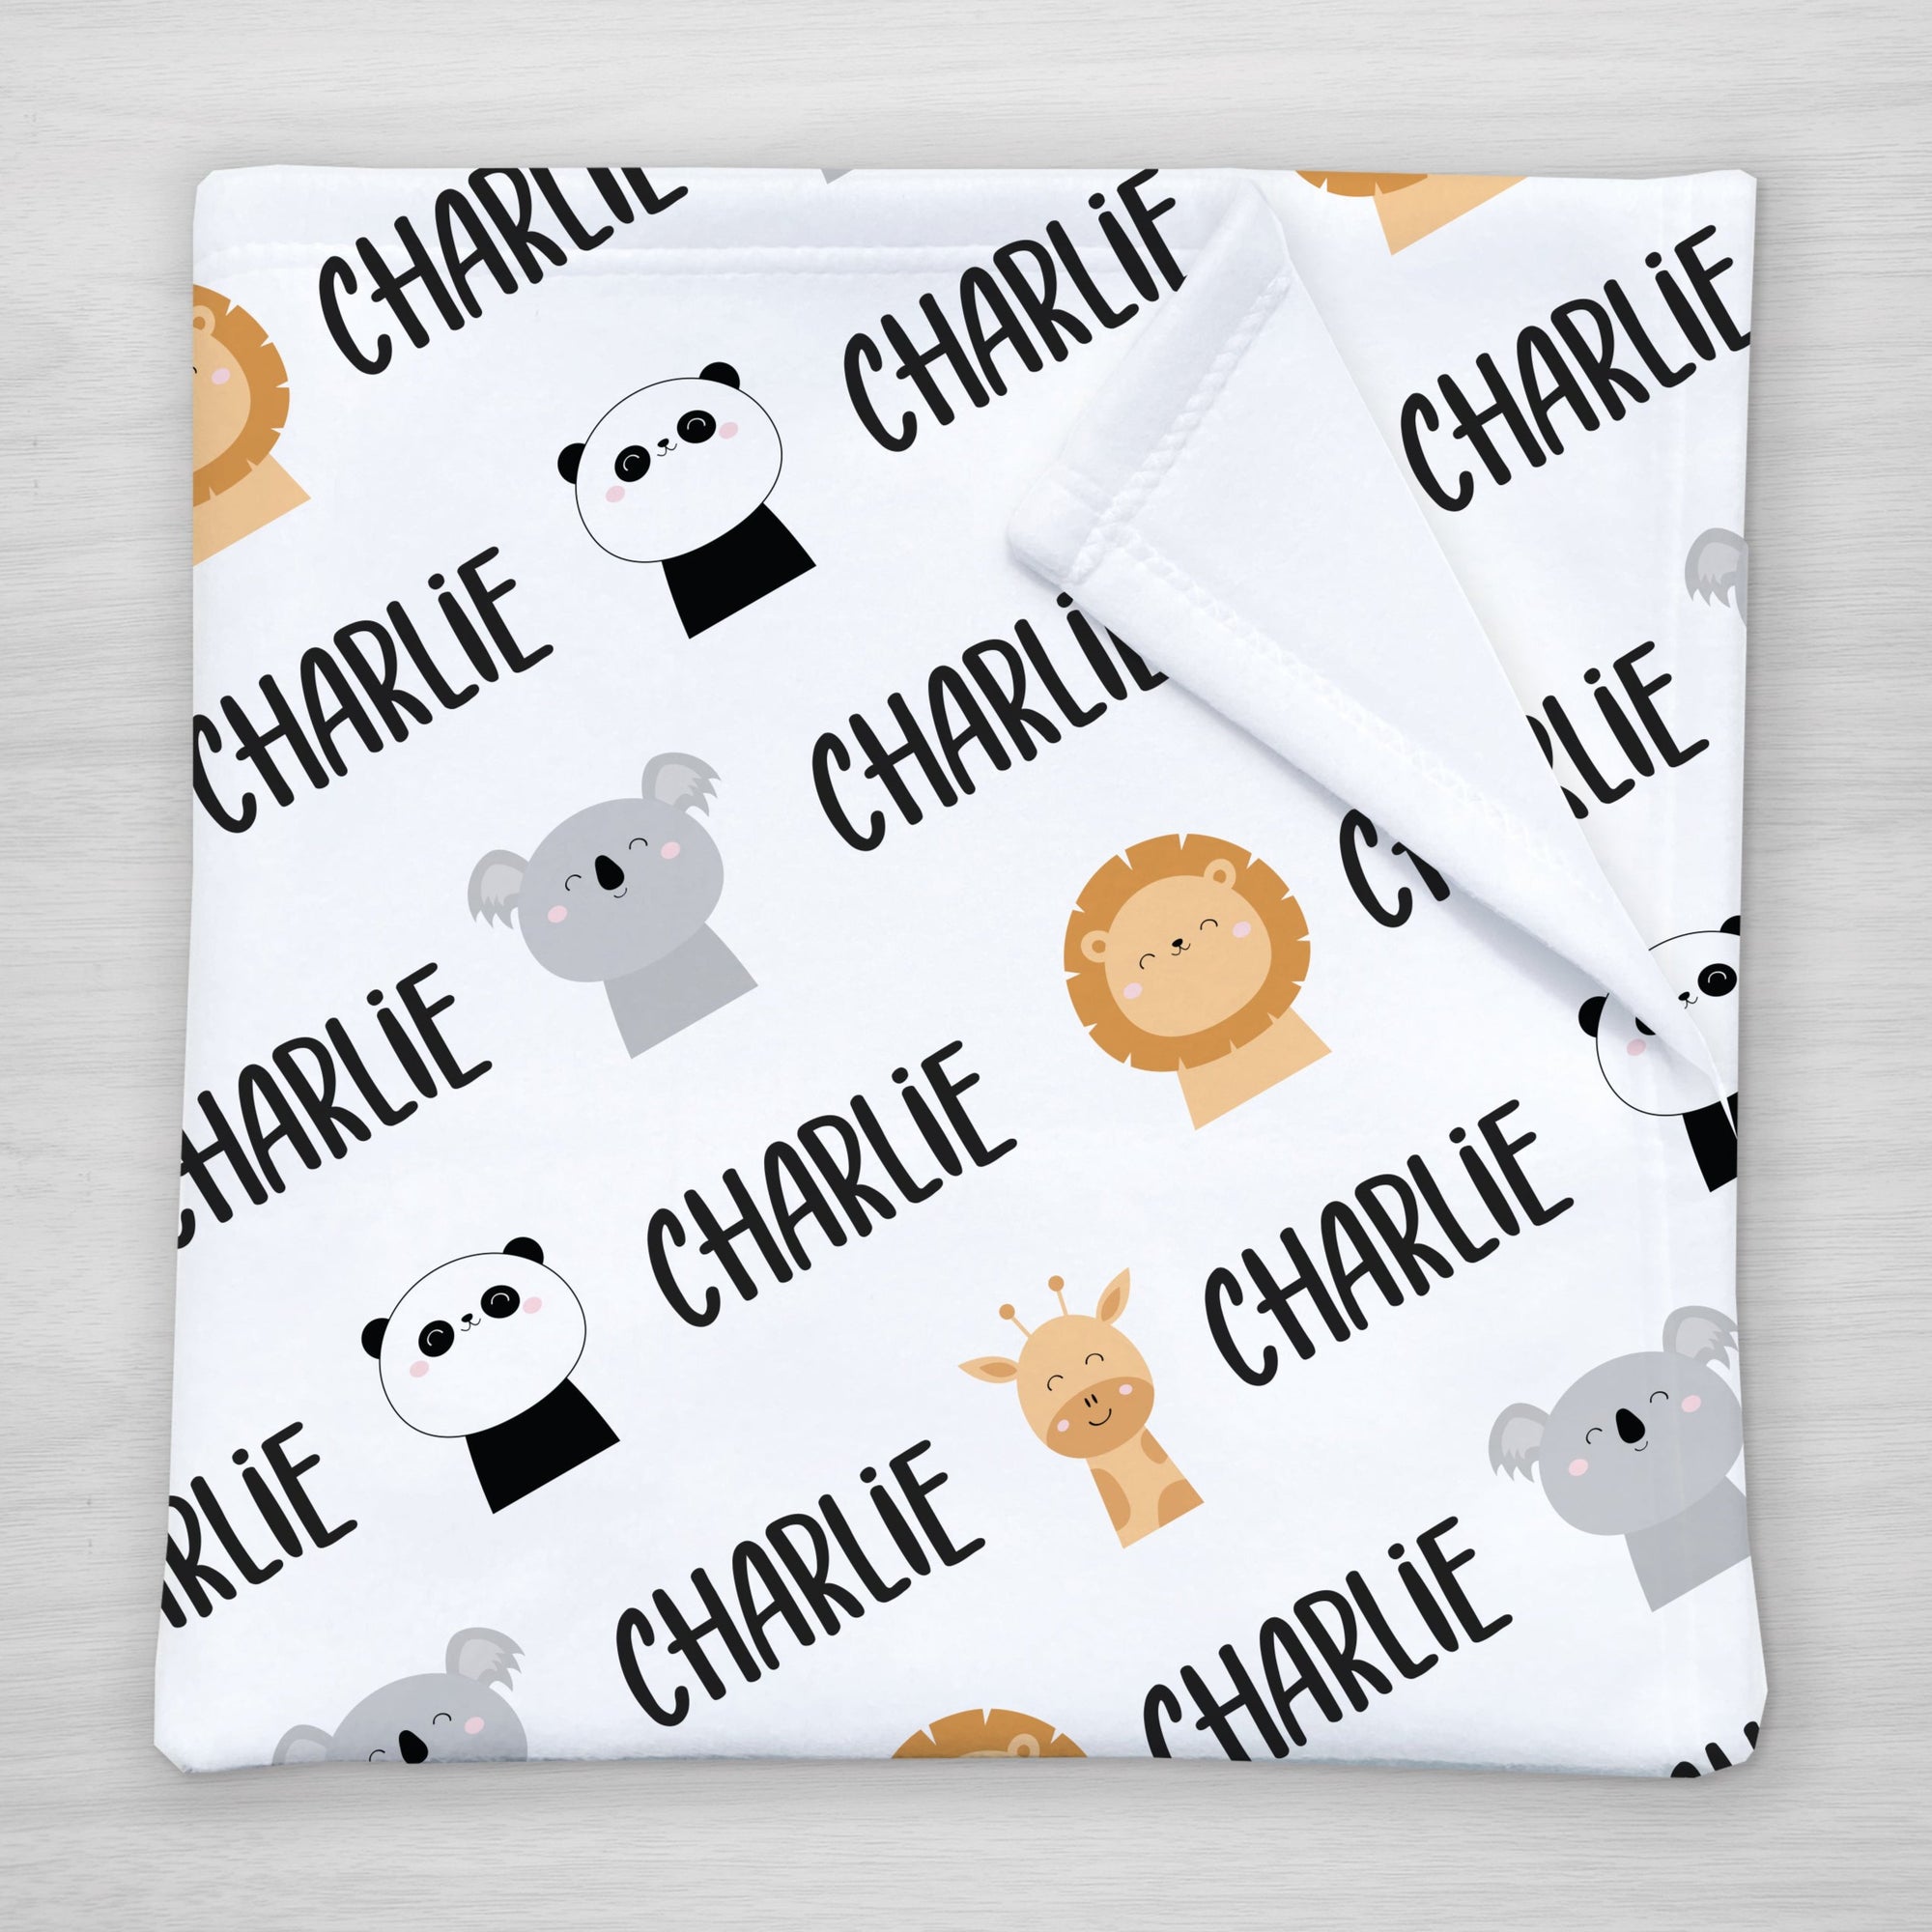 Our fun animal blanket is personalized with your little one's name. Featuring a lion, koala, panda, and giraffe. Choose a smaller size for a stroller blanket, or one of our huge sherpa blankets for a snuggle blanket that will be loved for years. 